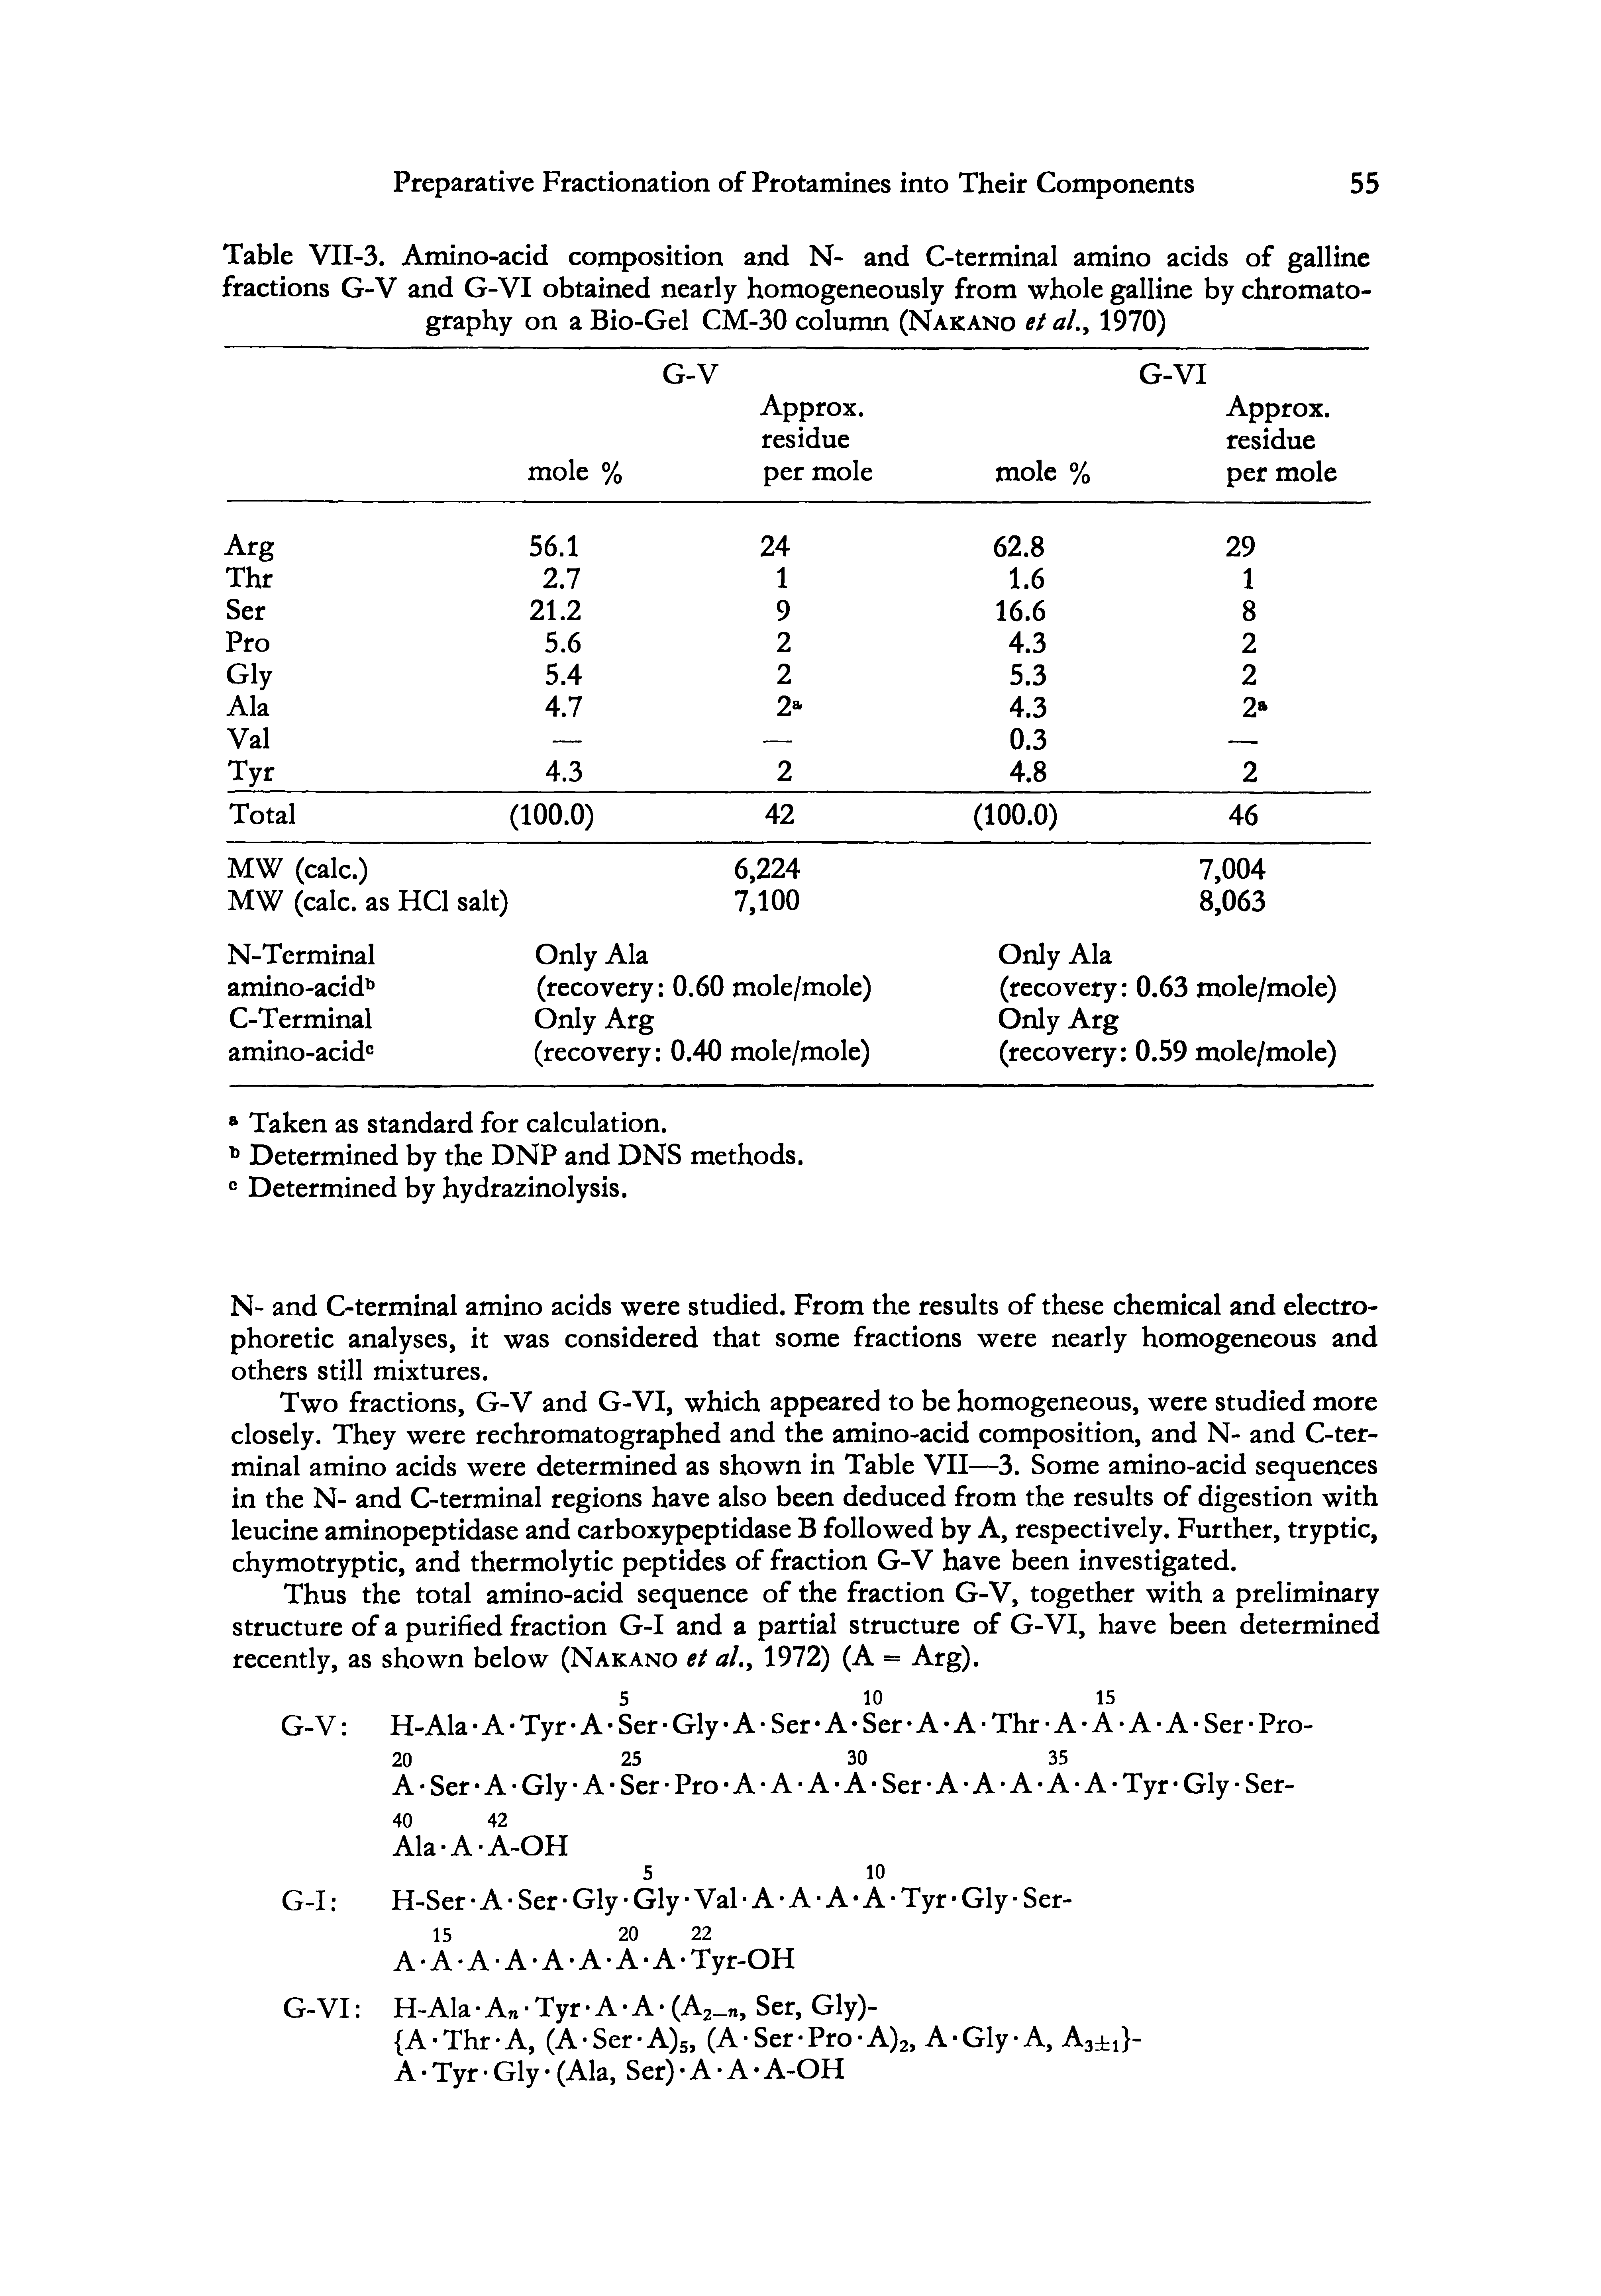 Table VII-3. Amino-acid composition and N- and C-terminal amino acids of gallinc fractions G-V and G-VI obtained nearly homogeneously from whole galline by chromatography on a Bio-Gel CM-30 column (Nakano et al., 1970)...